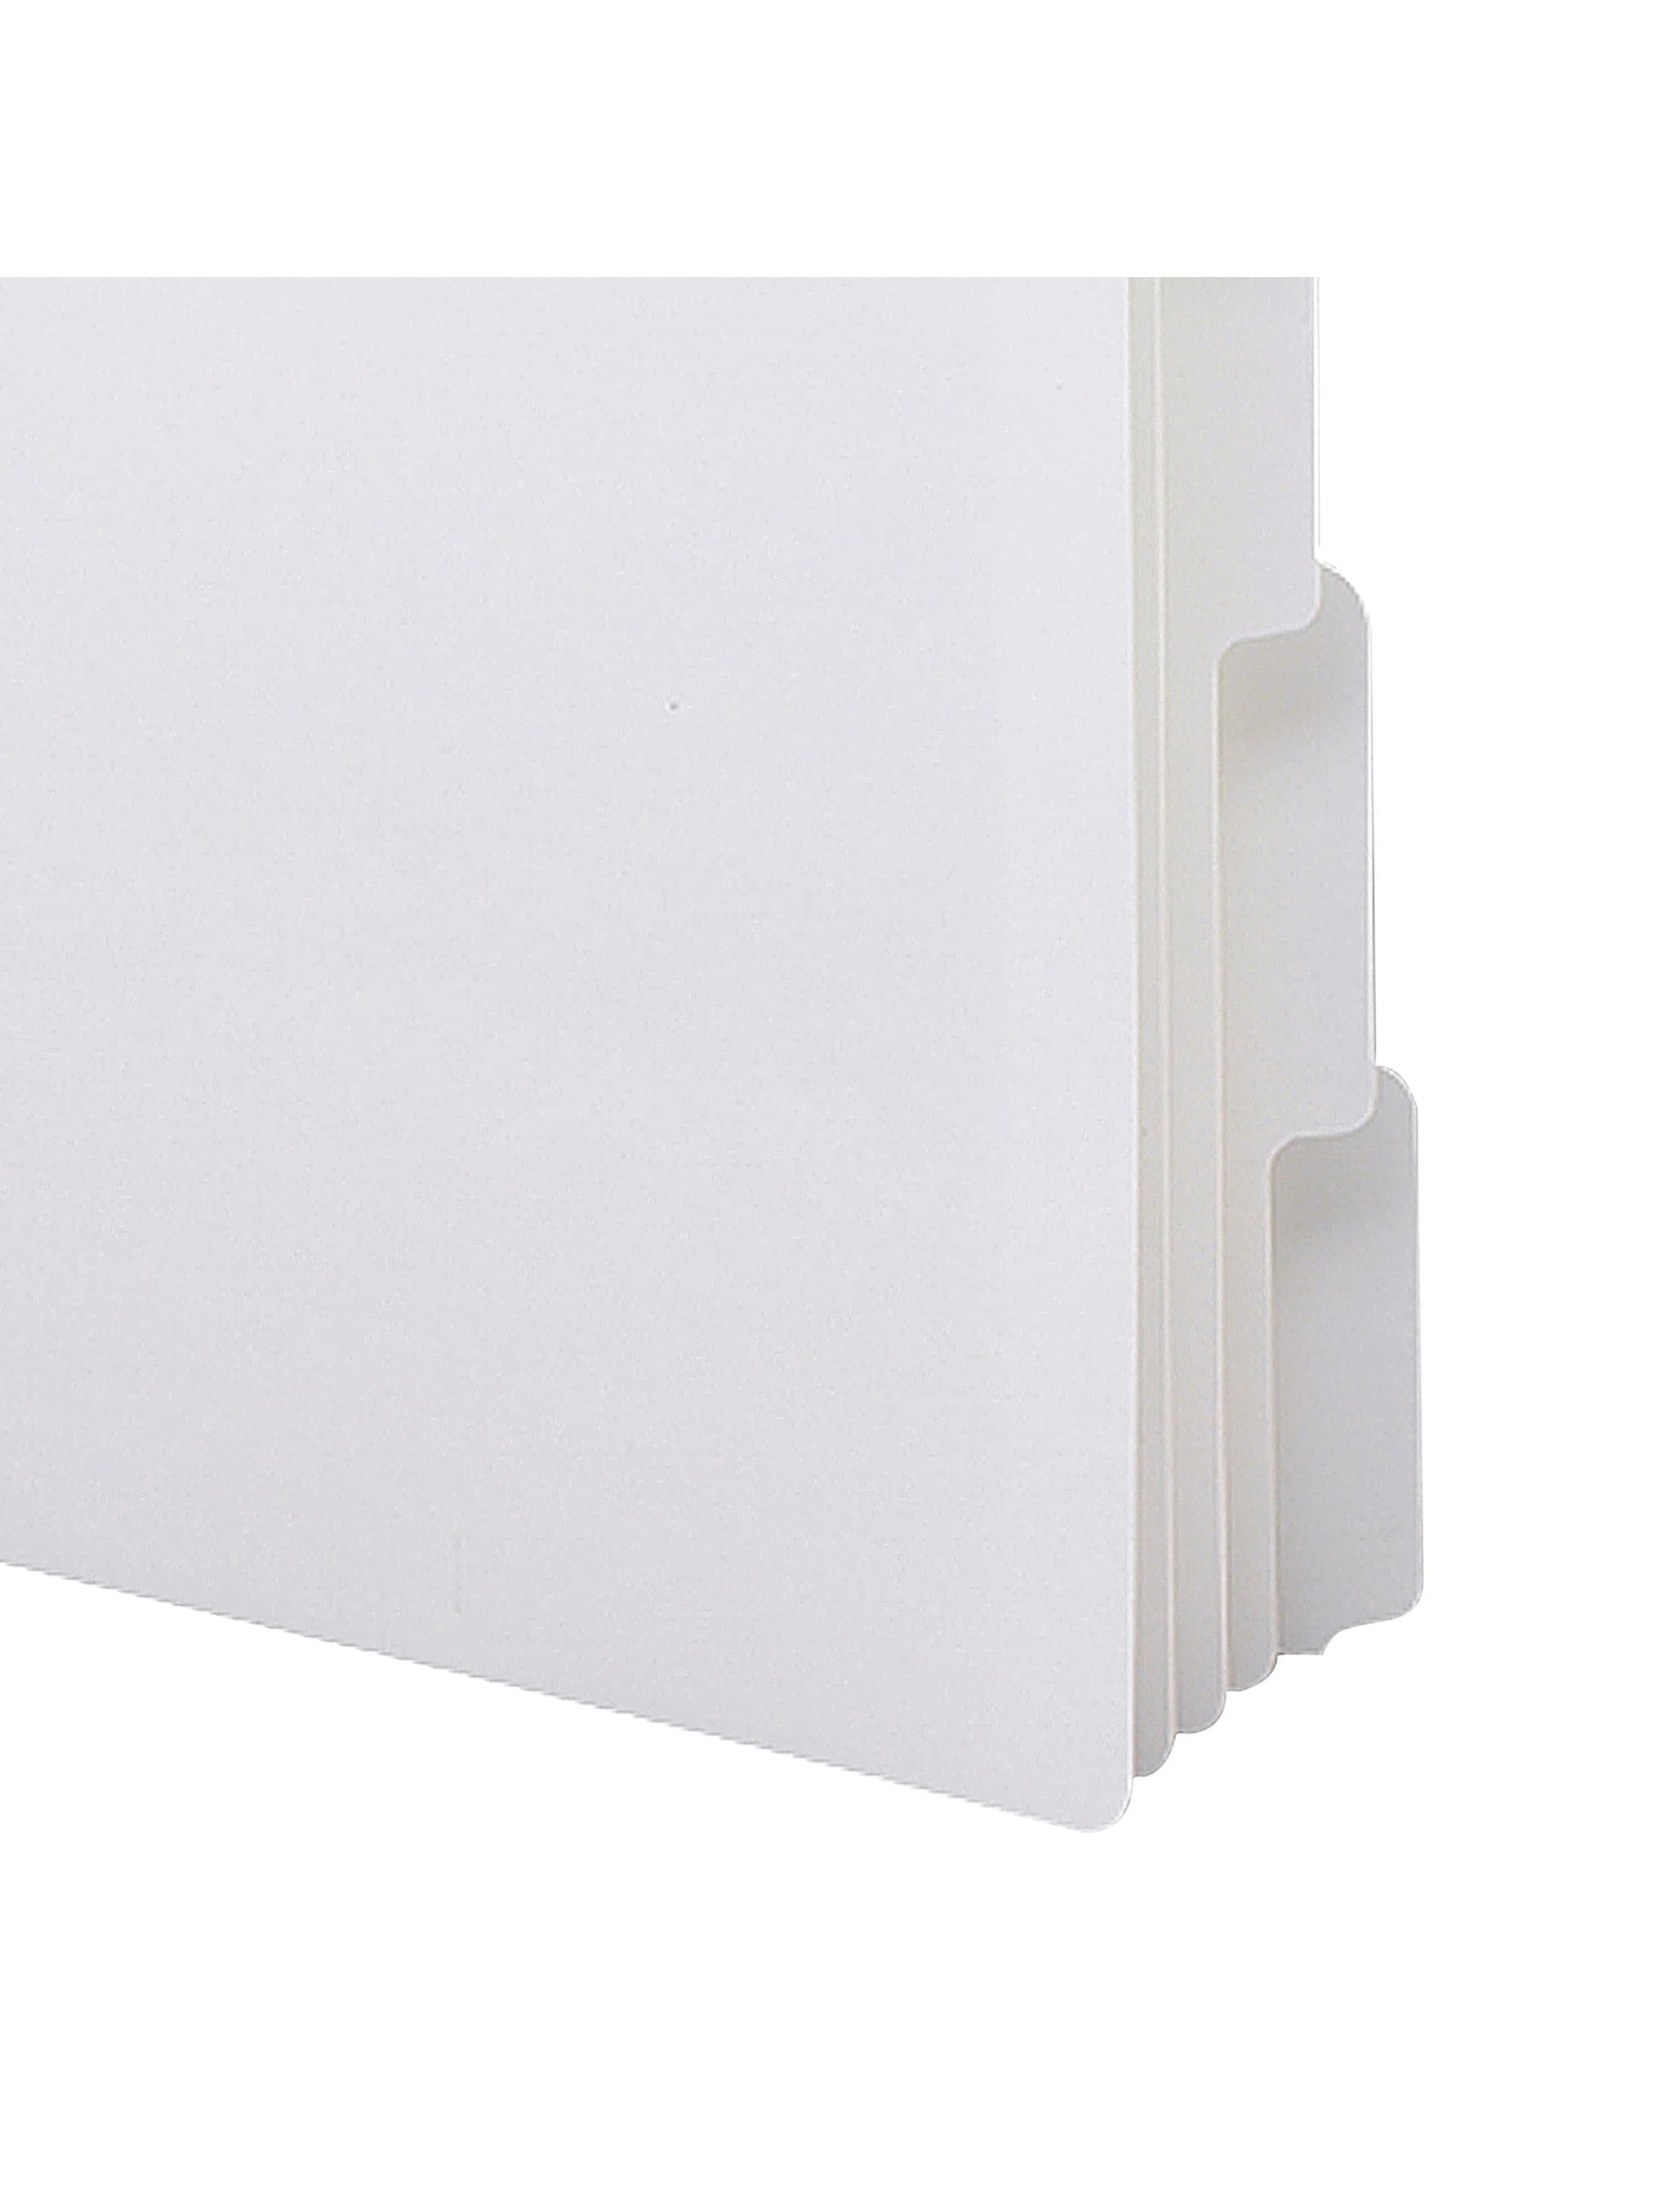 Three-Ring Binder Index Dividers, 20 Sets of 5 Dividers Each, 1/5-Cut Tabs, White Color, Letter Size, Set of 0, 30086486894150